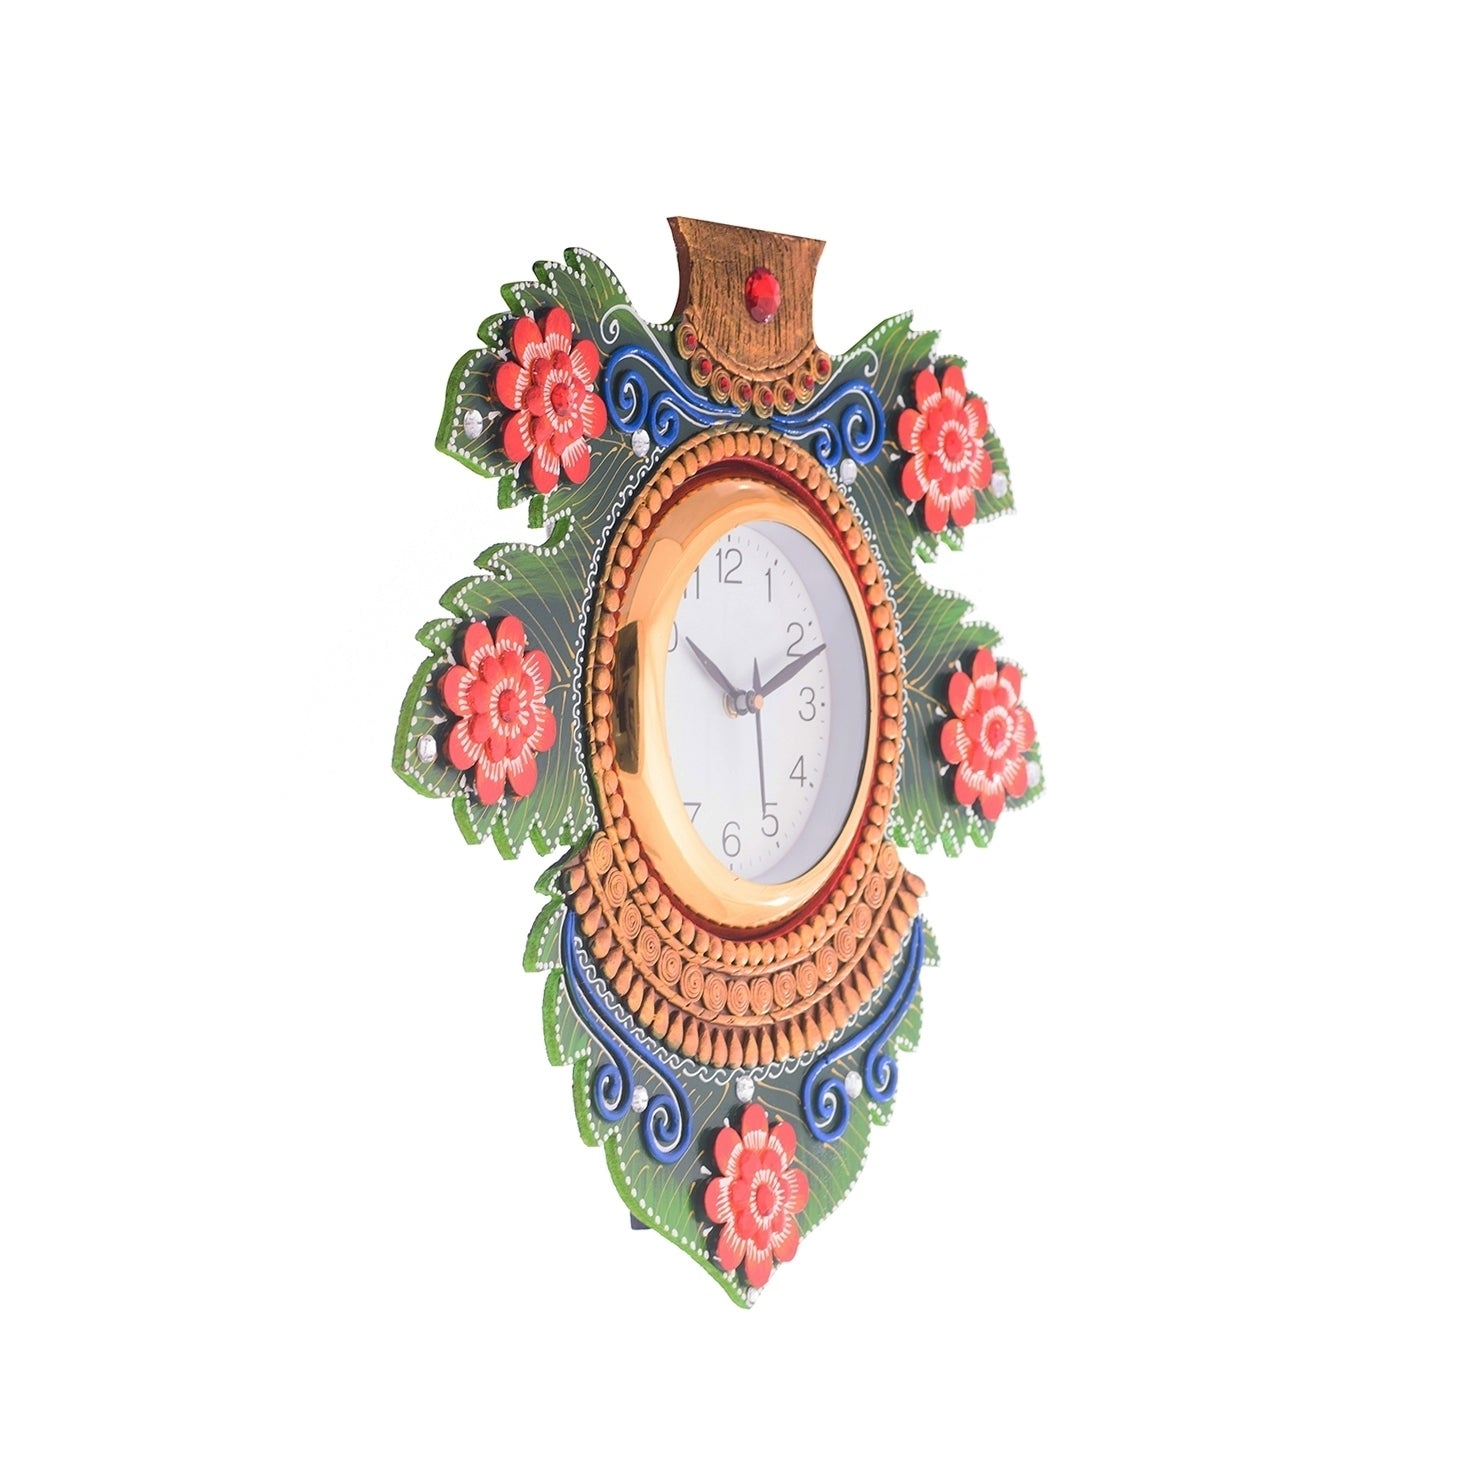 Floral Lead Shape Wooden Handcrafted Wooden Wall Clock (H - 15.5 Inch) 4